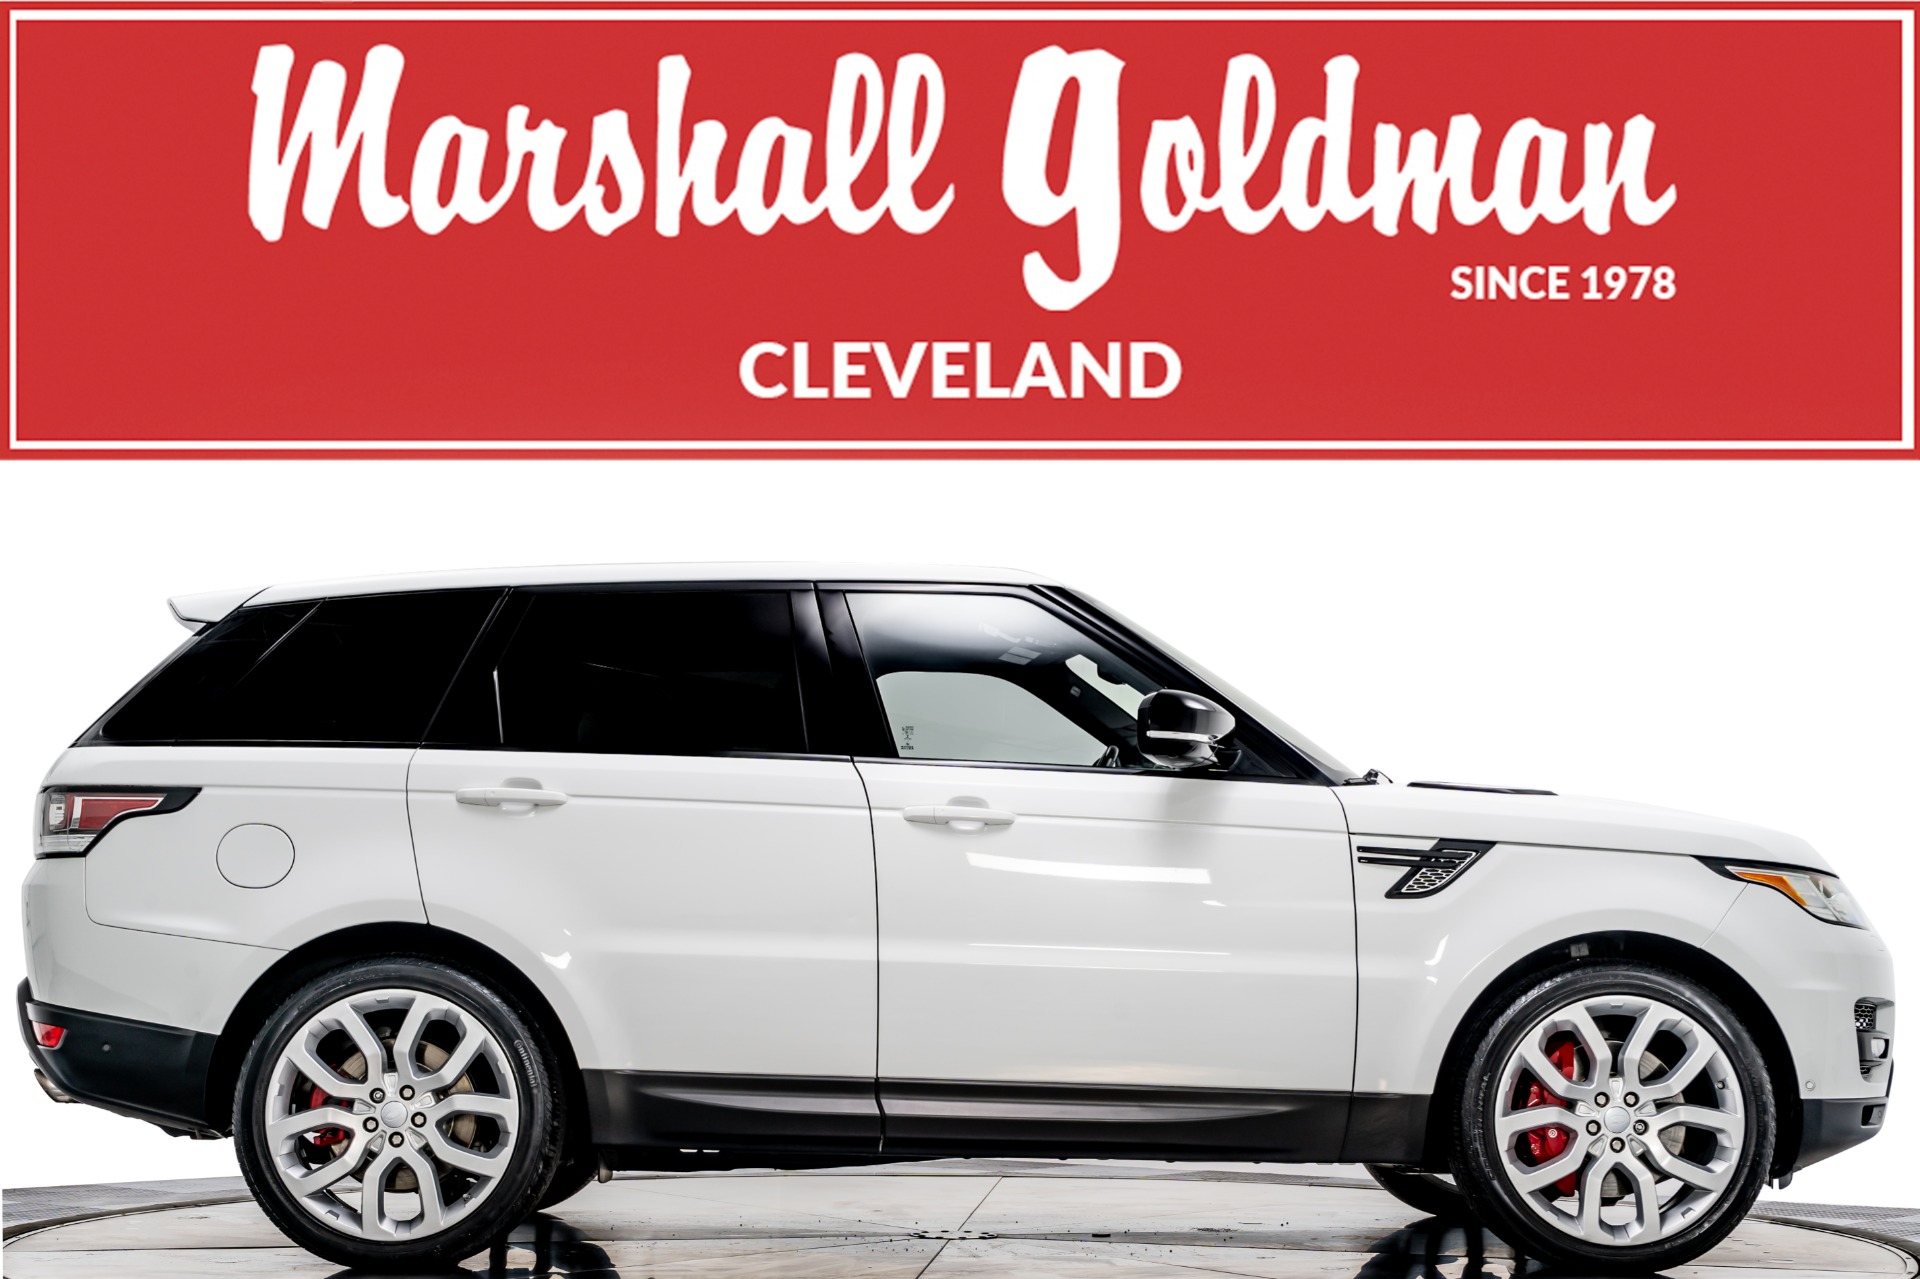 slecht Theseus heden Used 2016 Land Rover Range Rover Sport Supercharged For Sale (Sold) |  Marshall Goldman Cleveland Stock #W21293